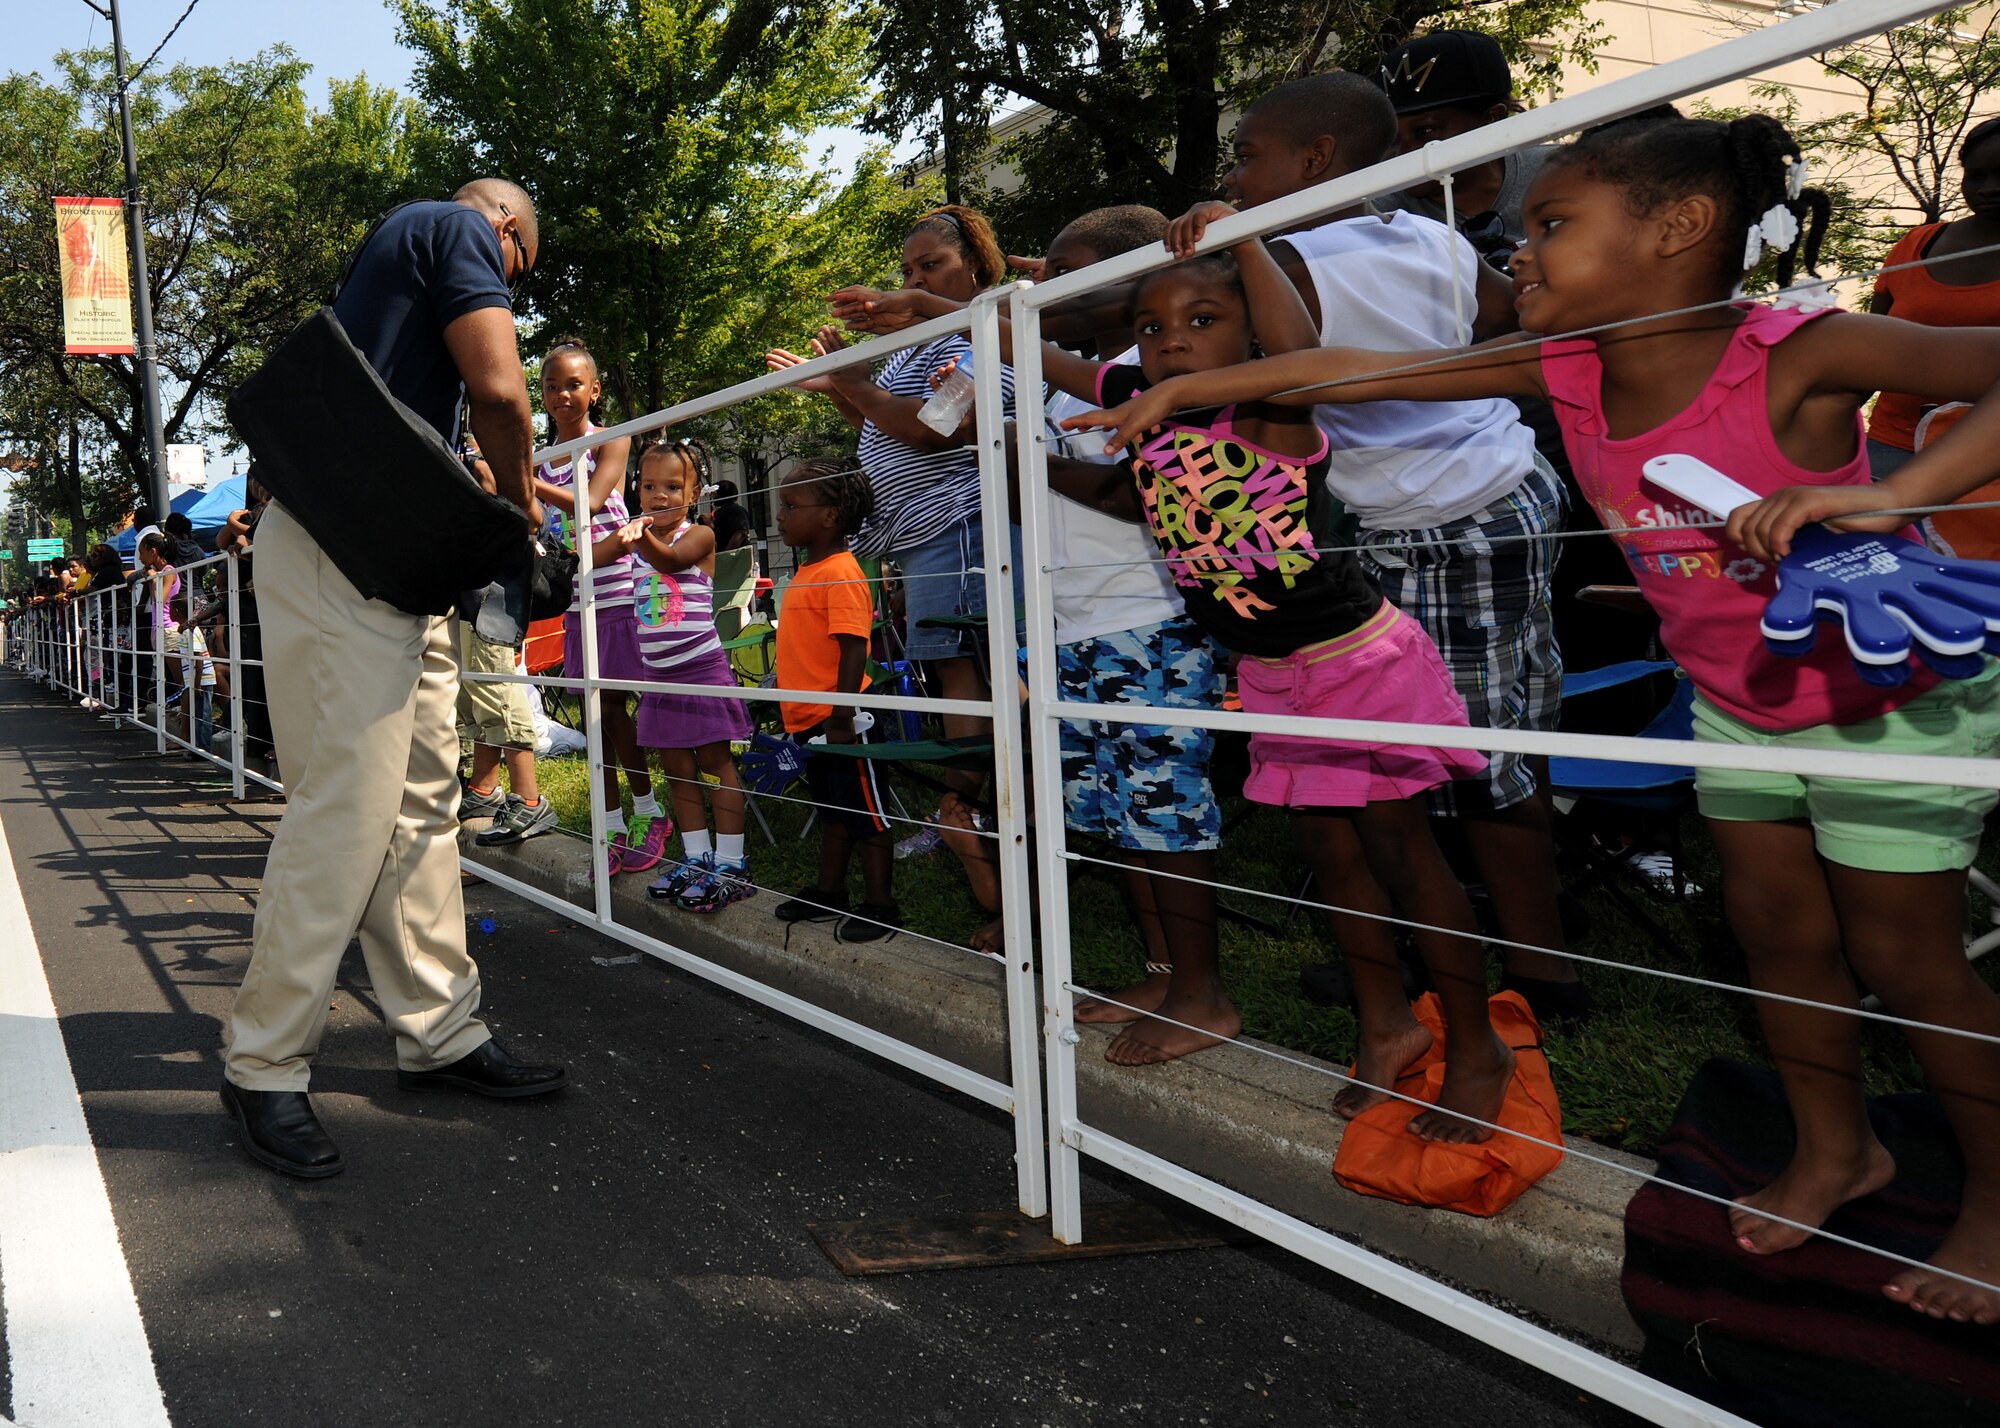 Master Sgt. Sherwin Severin, United States Air Force Pallbearer Flight Superintendent hands out USAF memorabilia during the Bud Billiken Parade in Chicago, Il., August 9, 2014. The 40-person formation marched in front of a live and televised audience of millions of people. (U.S. Air Force photo/ Senior Airman Nesha Humes)